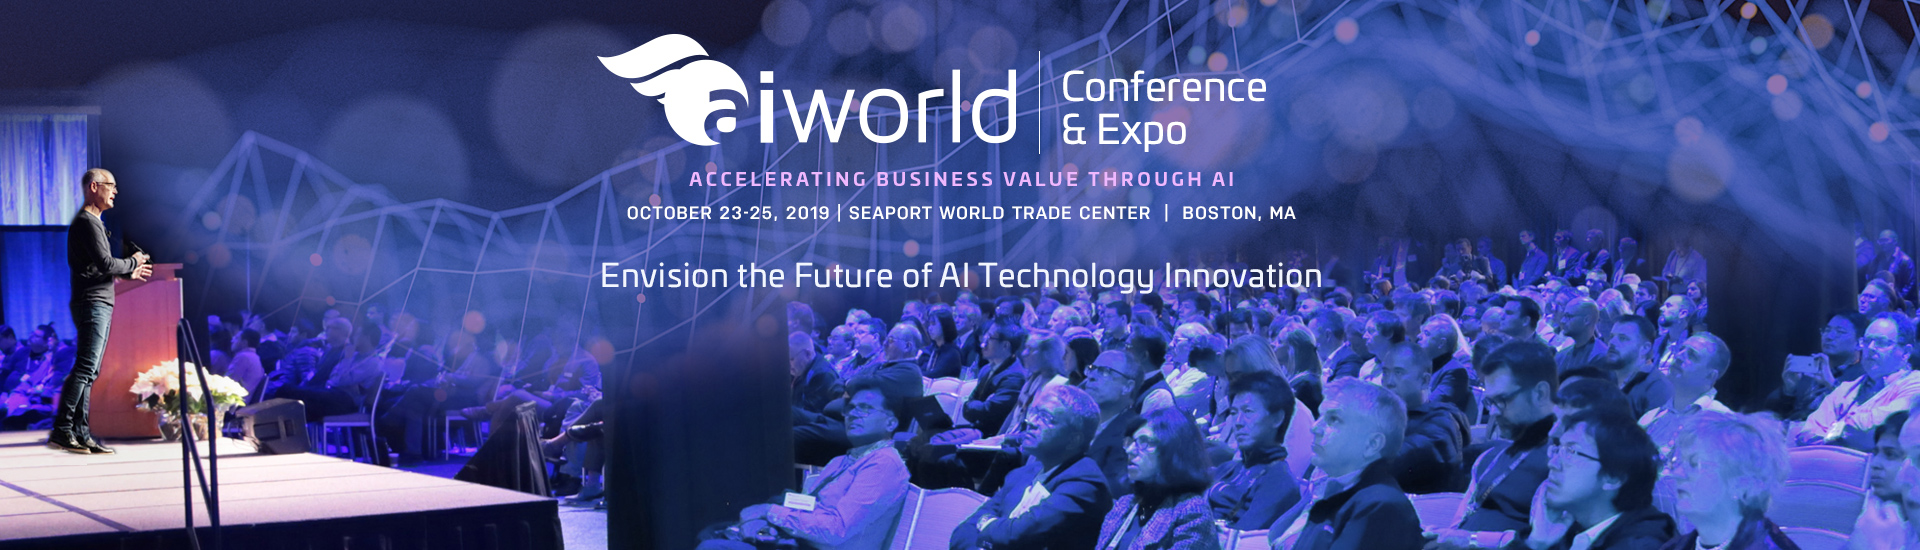 AI World Conference & Expo